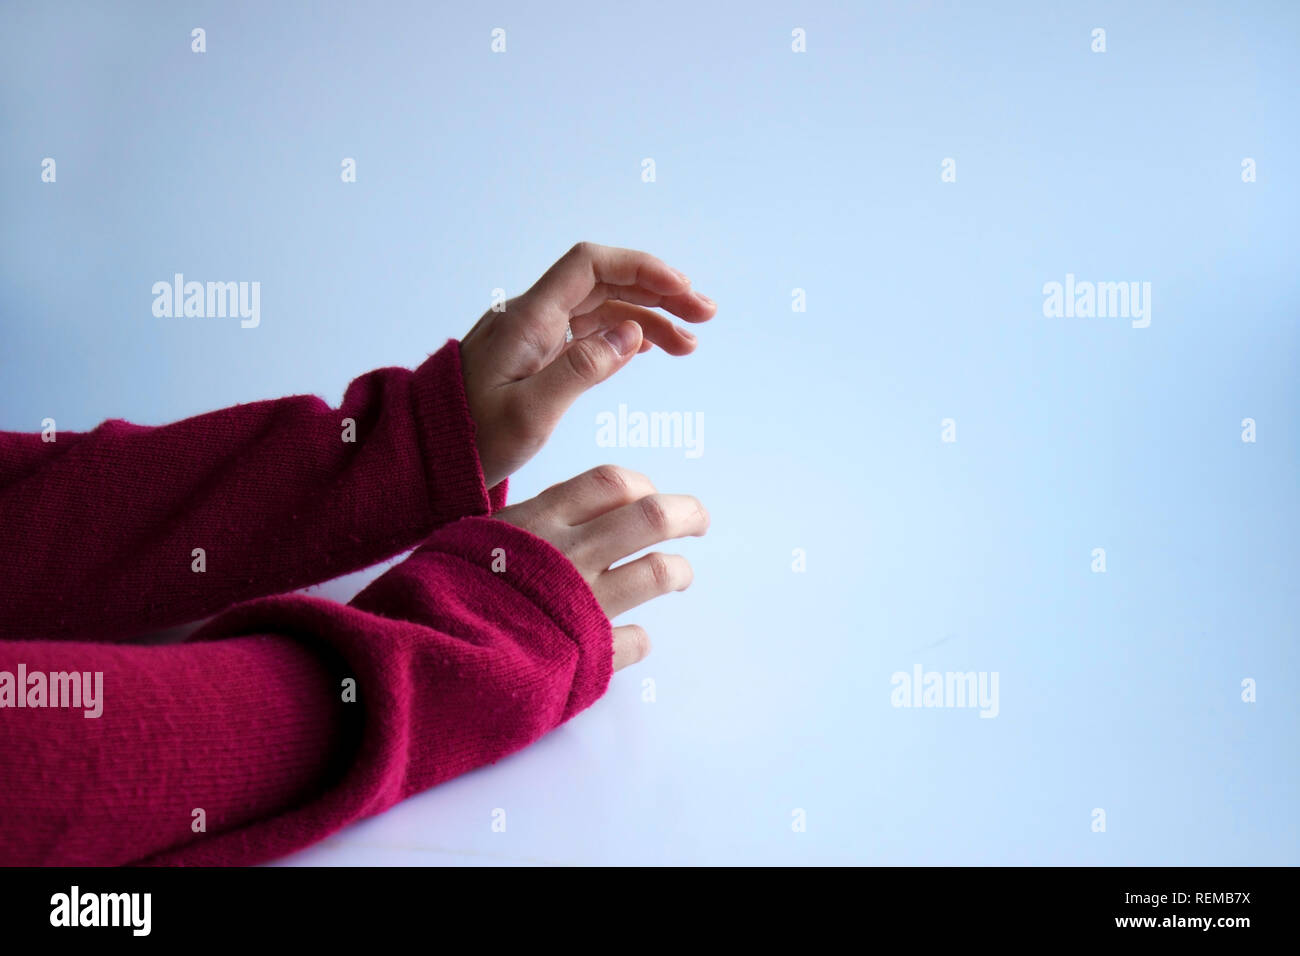 hands of a girl in a cozy purple magenta old sweater on a blue background Stock Photo